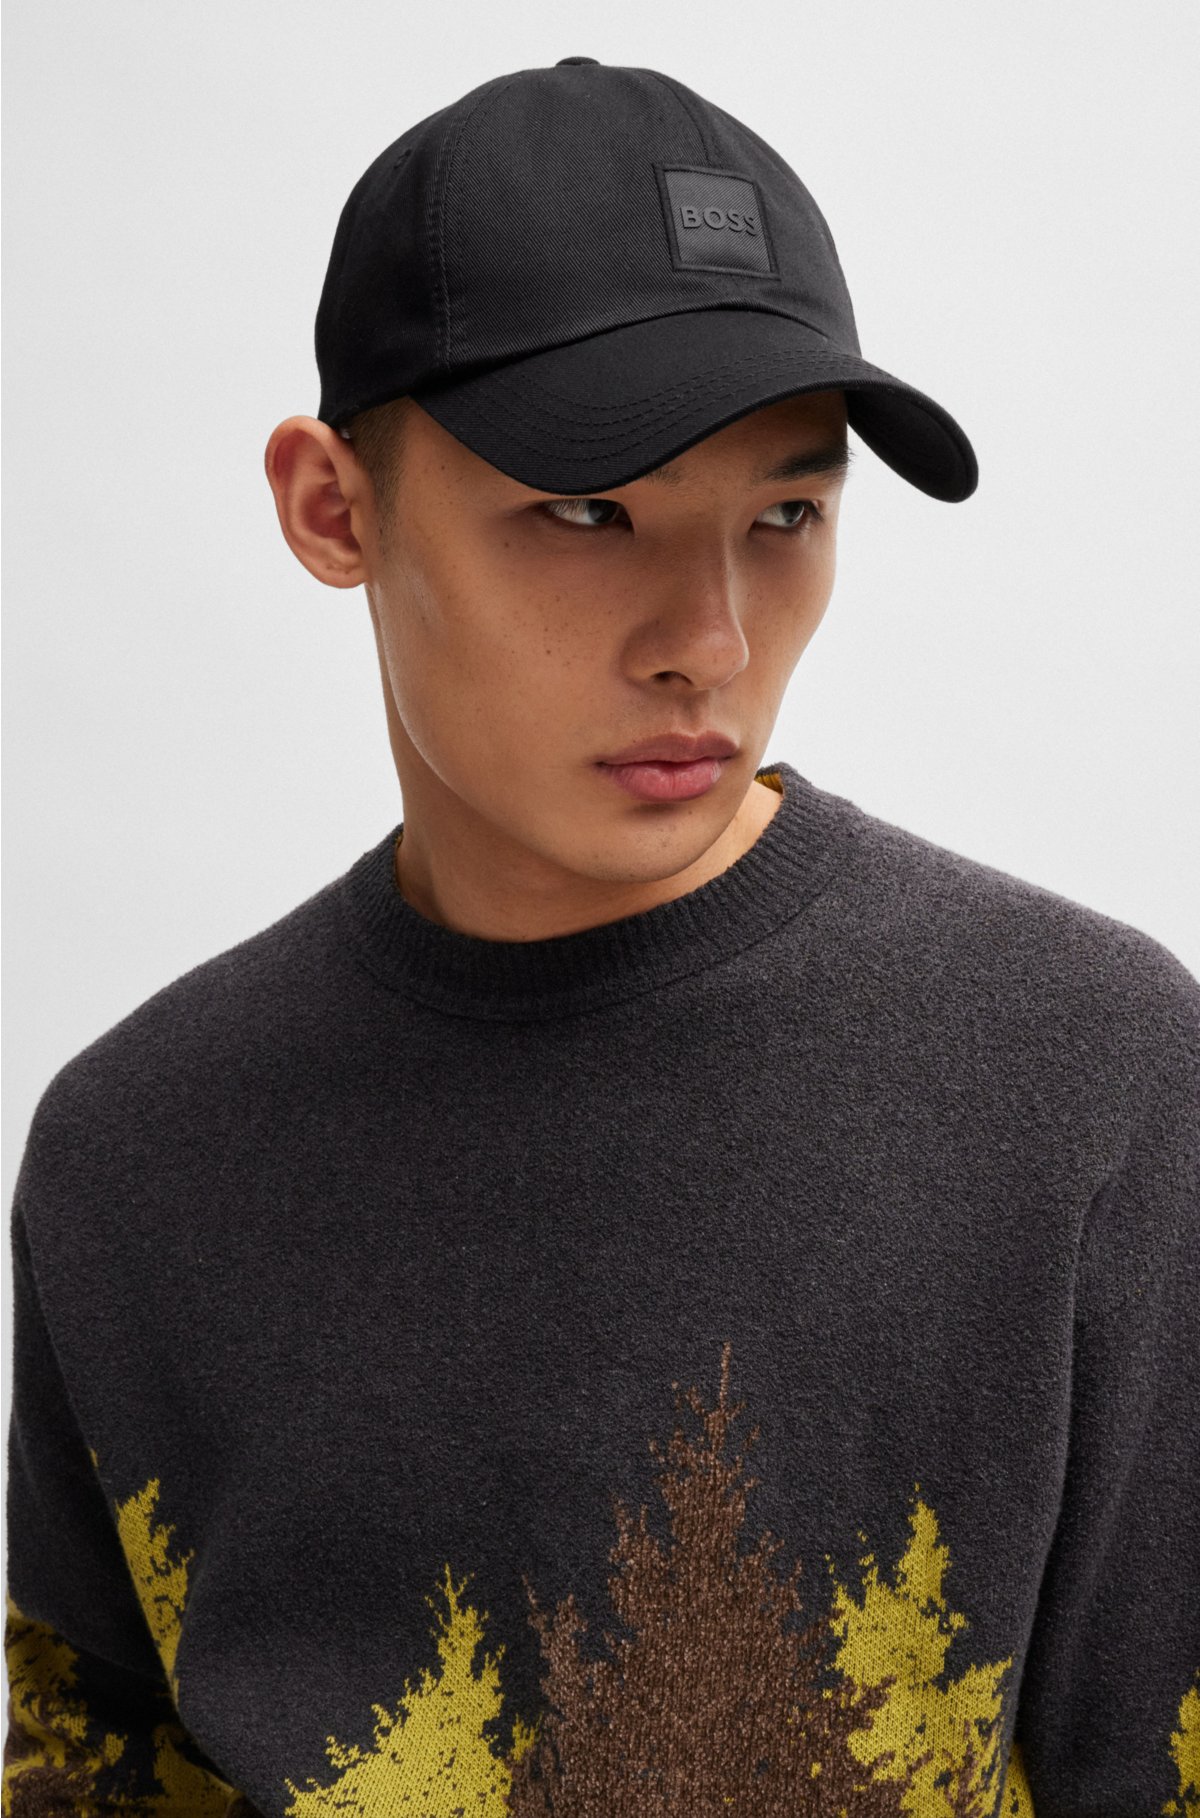 Cotton-twill cap with logo patch, Black